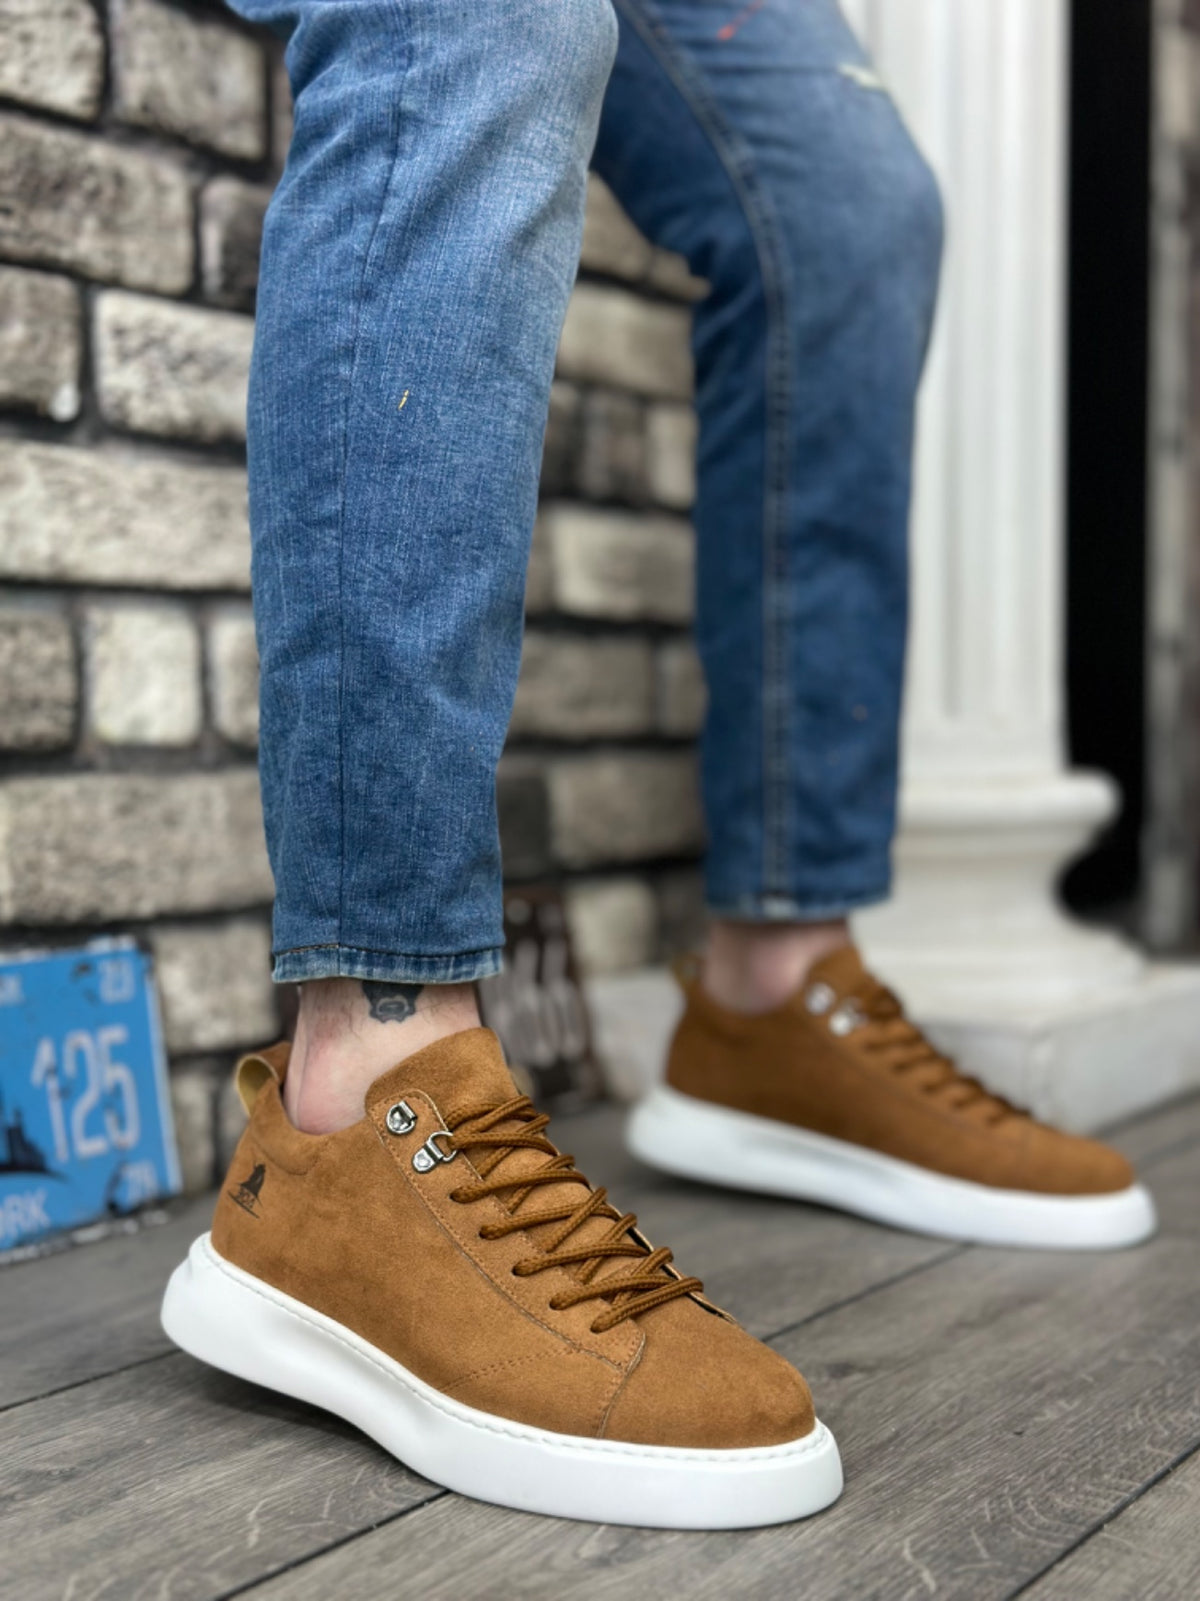 BA0331 Lace-Up Men's High Sole Tan Suede White Sole Sports Shoes - STREETMODE™